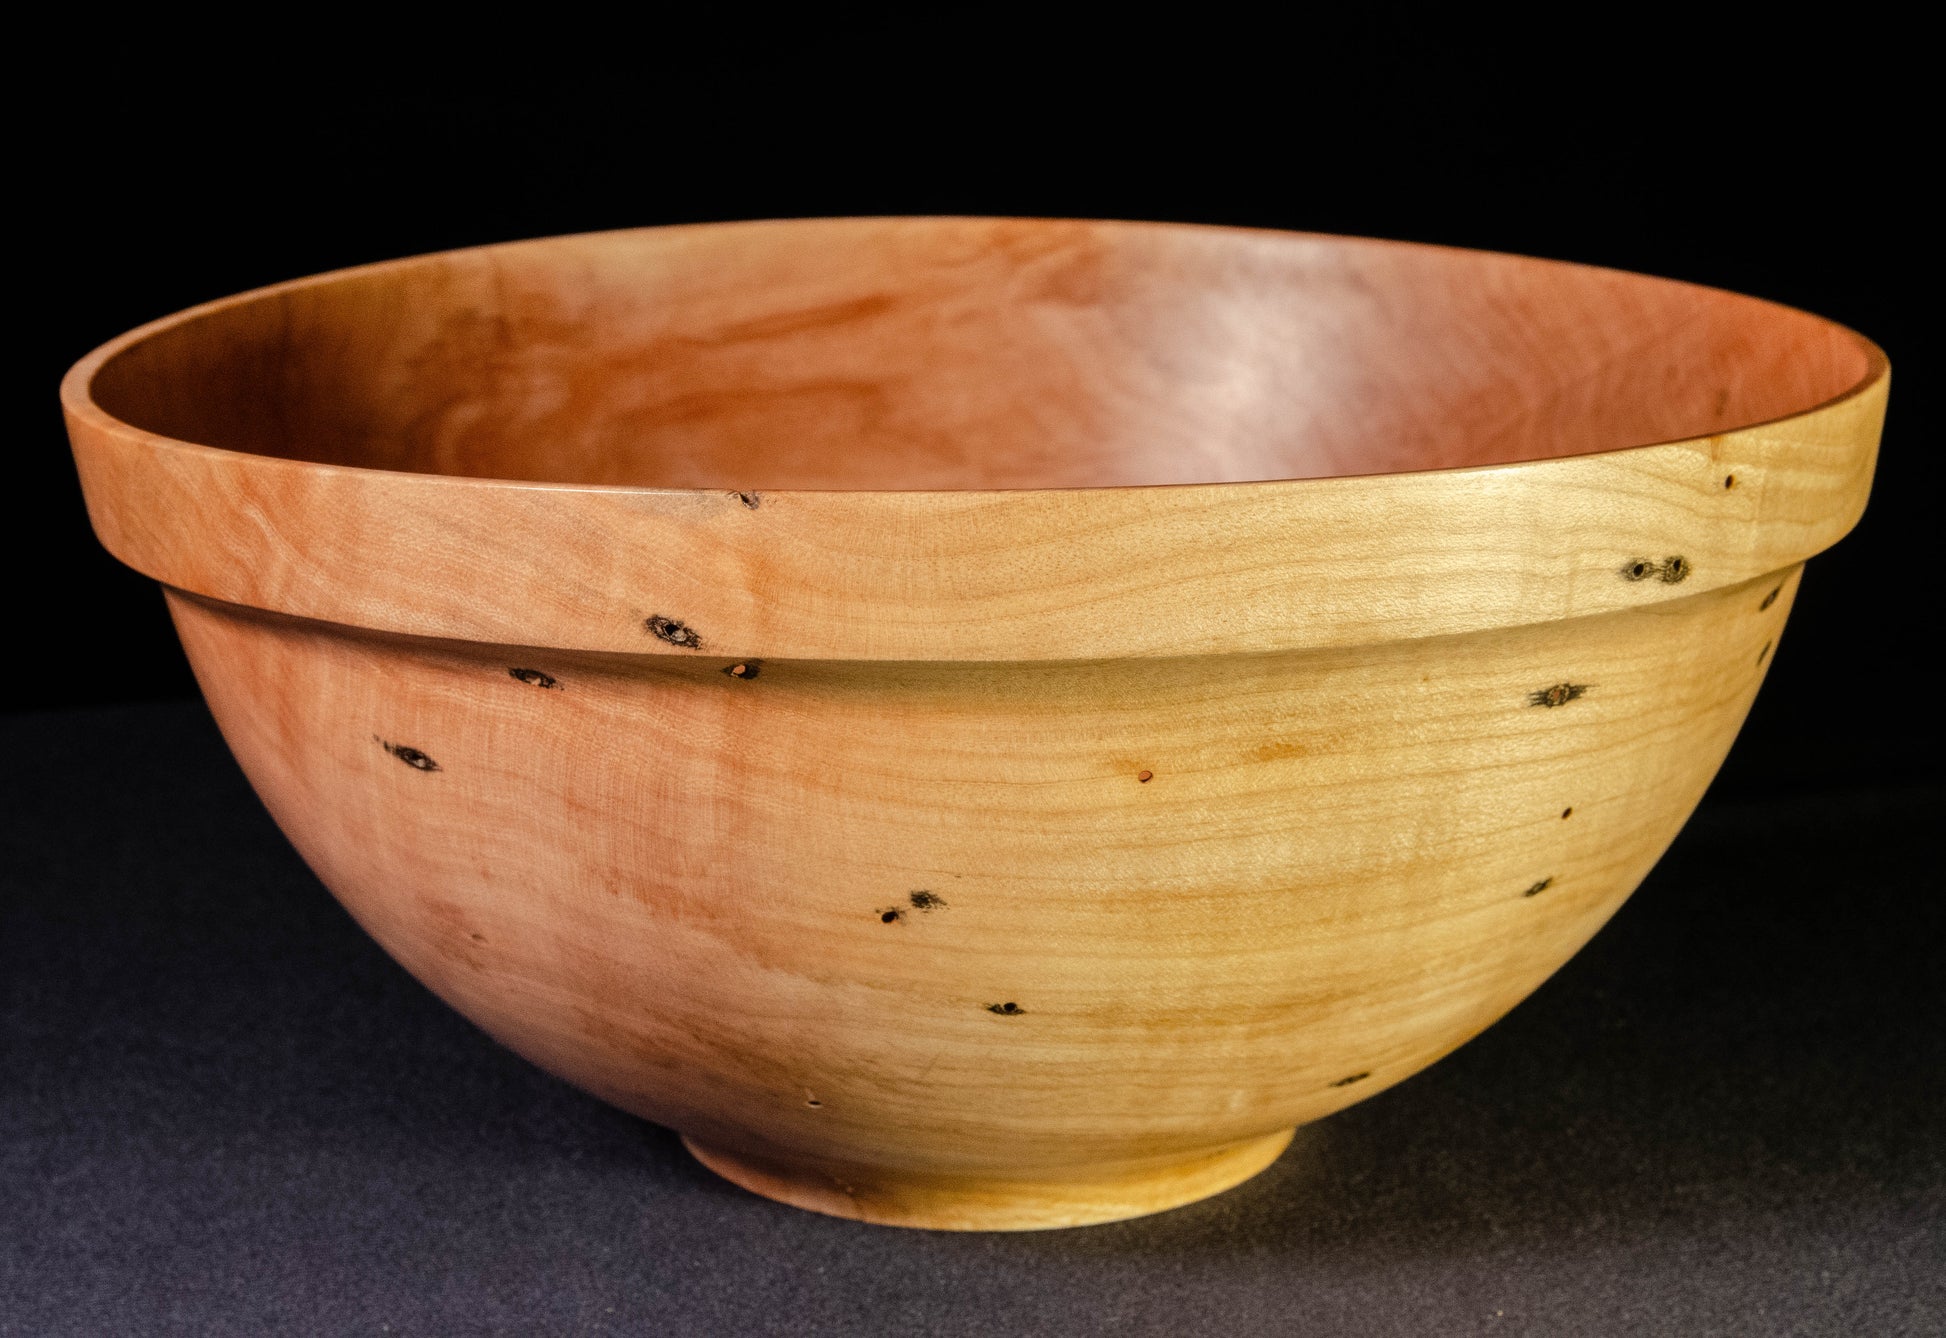 Medium Japanese Maple Bowl with strong outdent rim and pleasing grain warmth